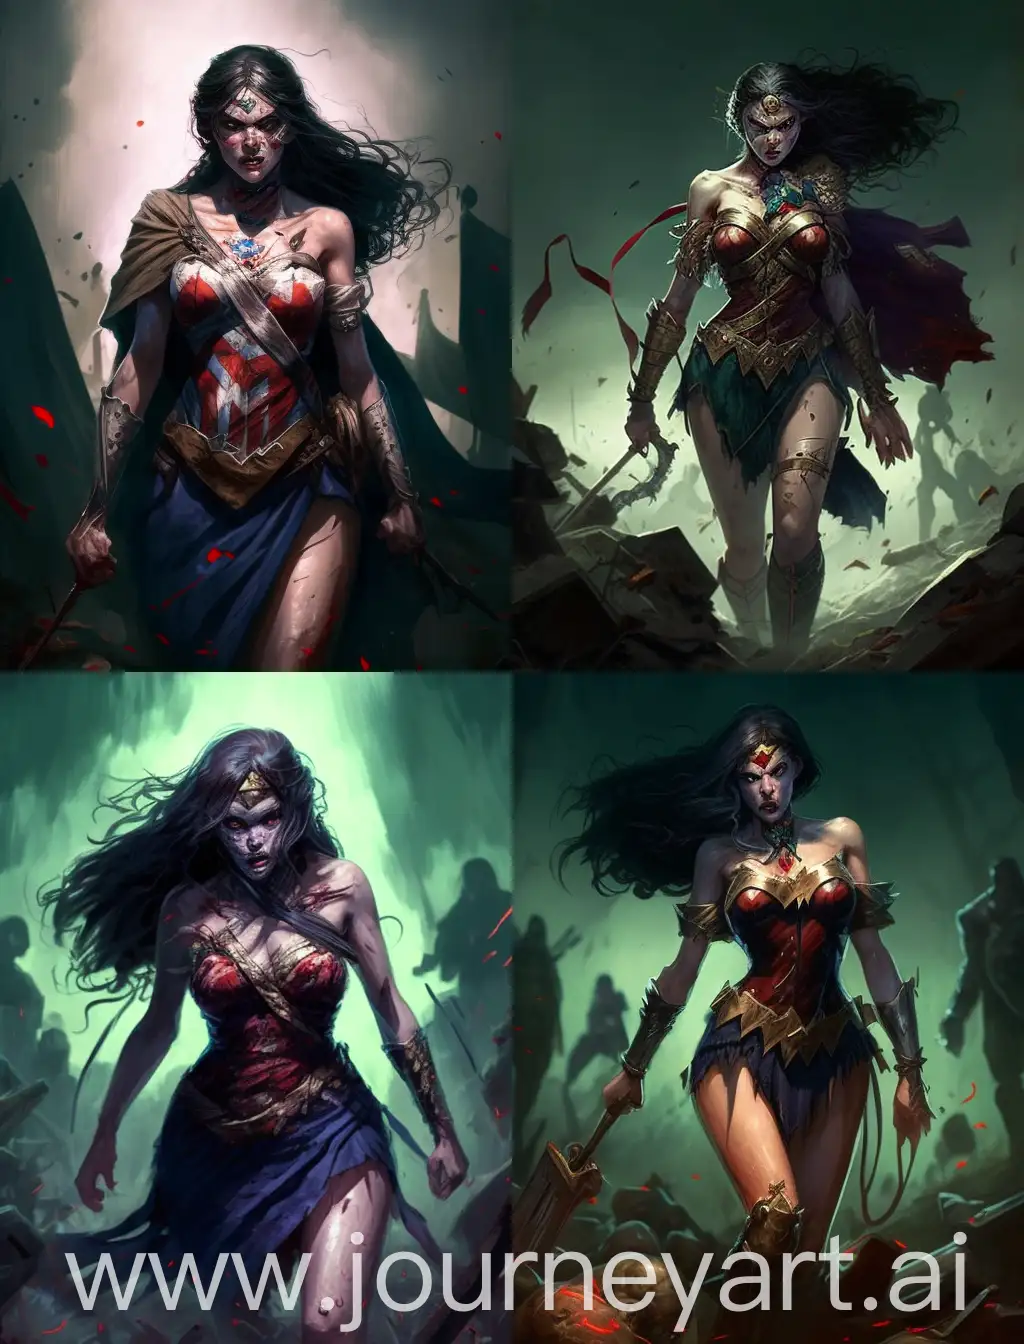 Wonder Woman has turned into a zombie and is dressed in clothes, a handkerchief is tied around her waist, and her clothes are dirty and torn, and she is trying to walk half-heartedly and weakly. Zombies are around them